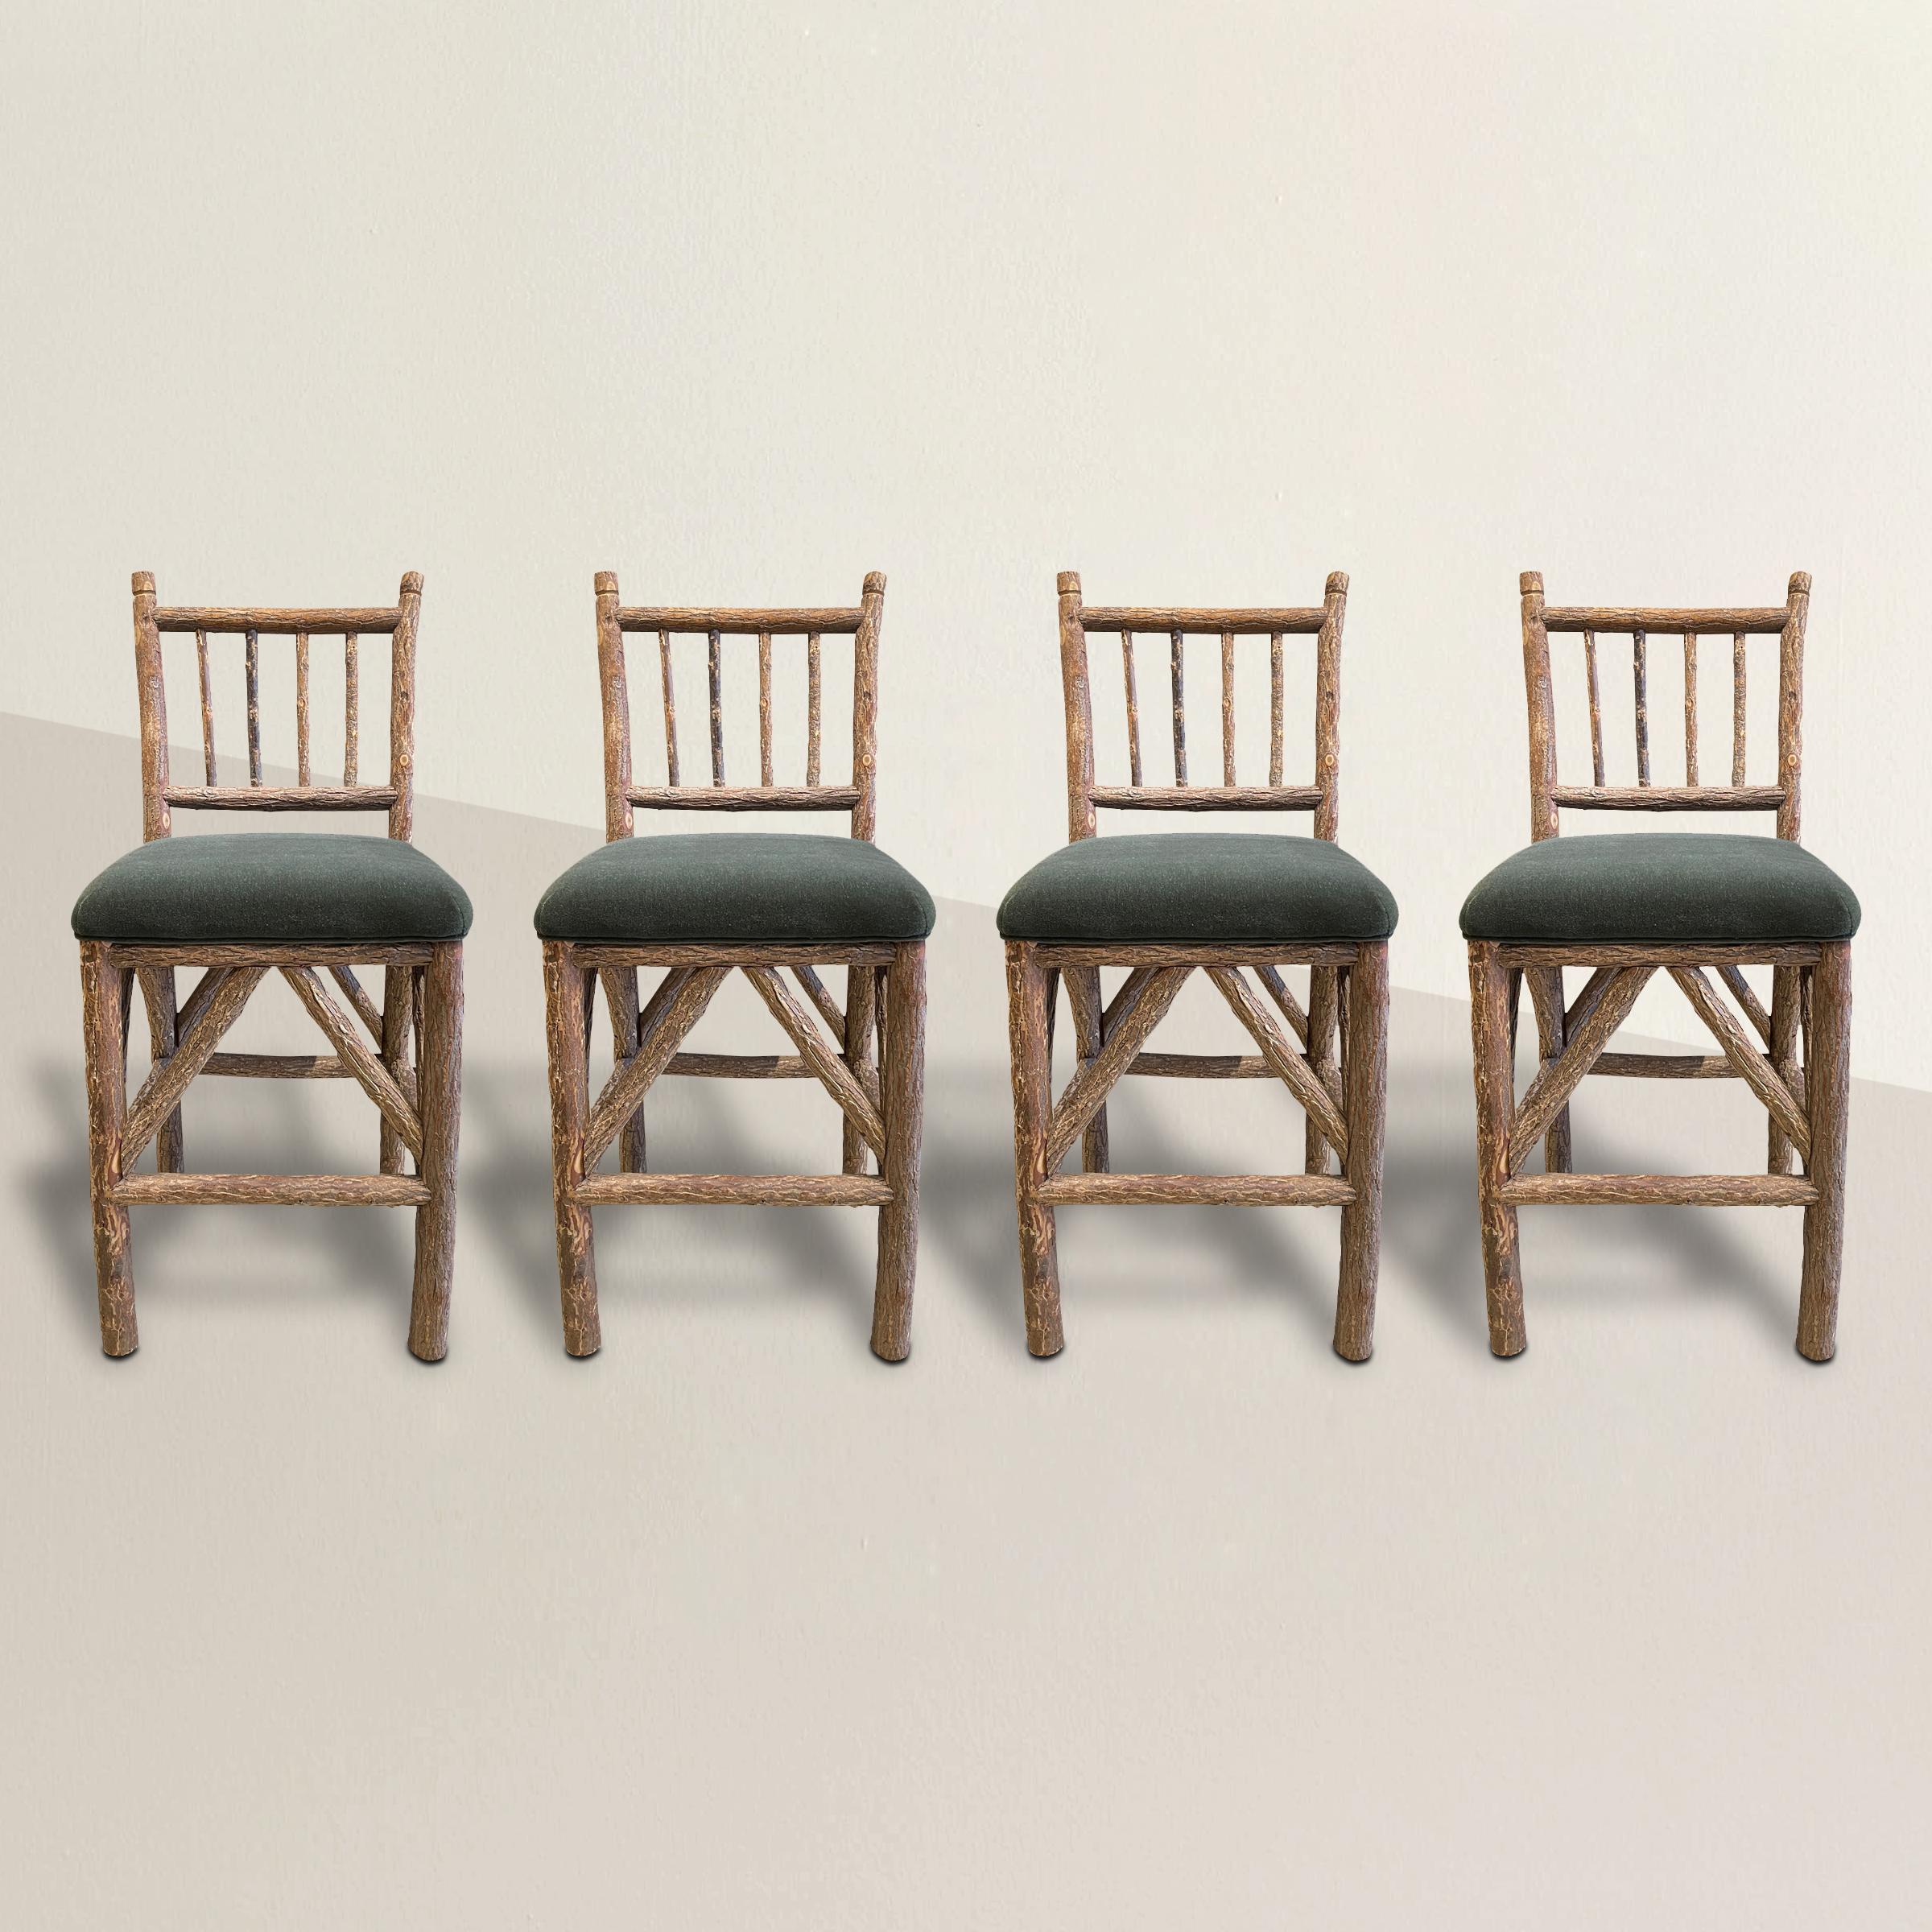 A charming set of four 20th century American Old Hickory bar stools, each constructed hickory branches with the bark left on, and newly upholstered in a gray-green velvet. Perfect at your cabin bar, or at a tall dining table in your breakfast nook.